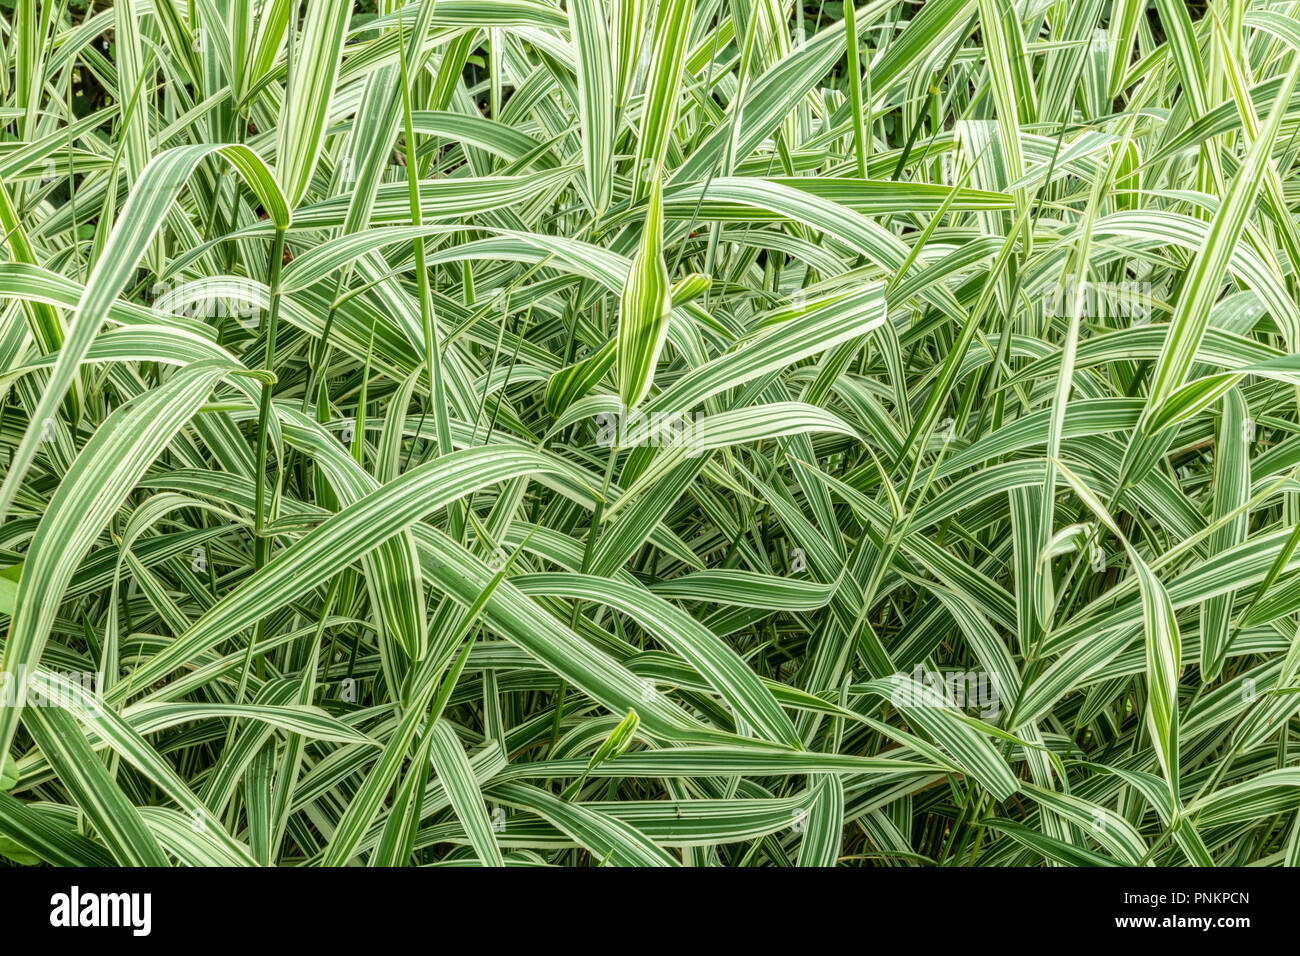 Phalaris arundinacea a variegated grass, sometimes known as reed canary grass. Stock Photo